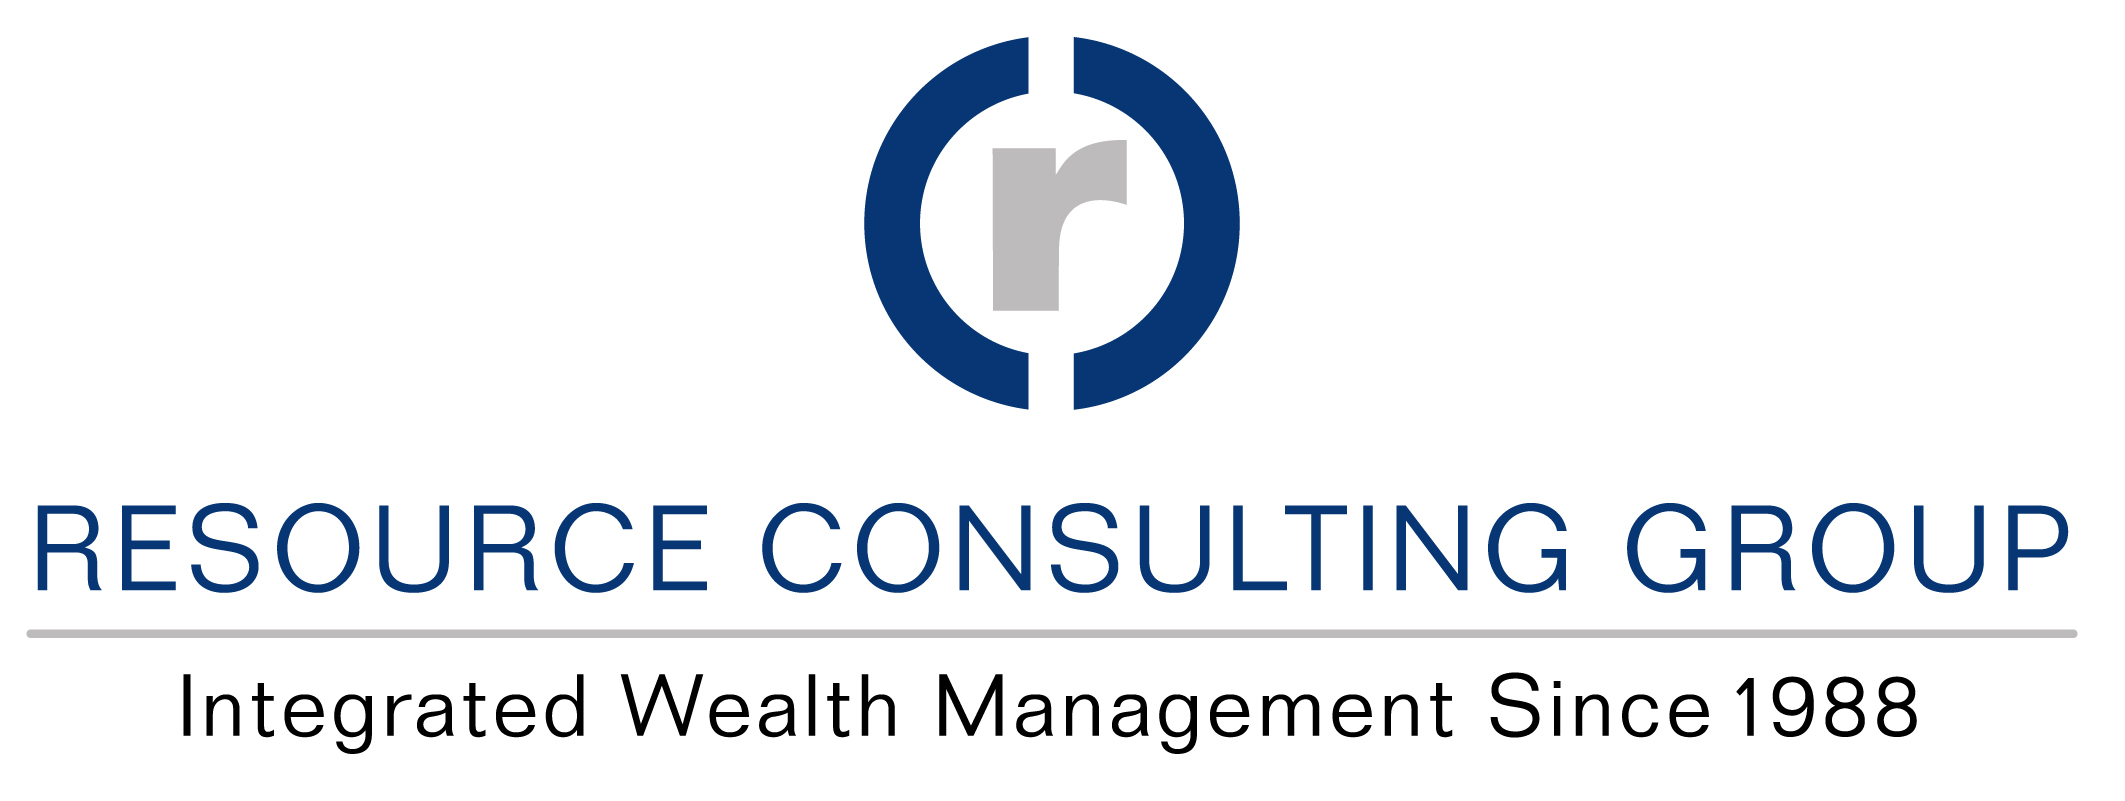 Resource Consulting Group logo